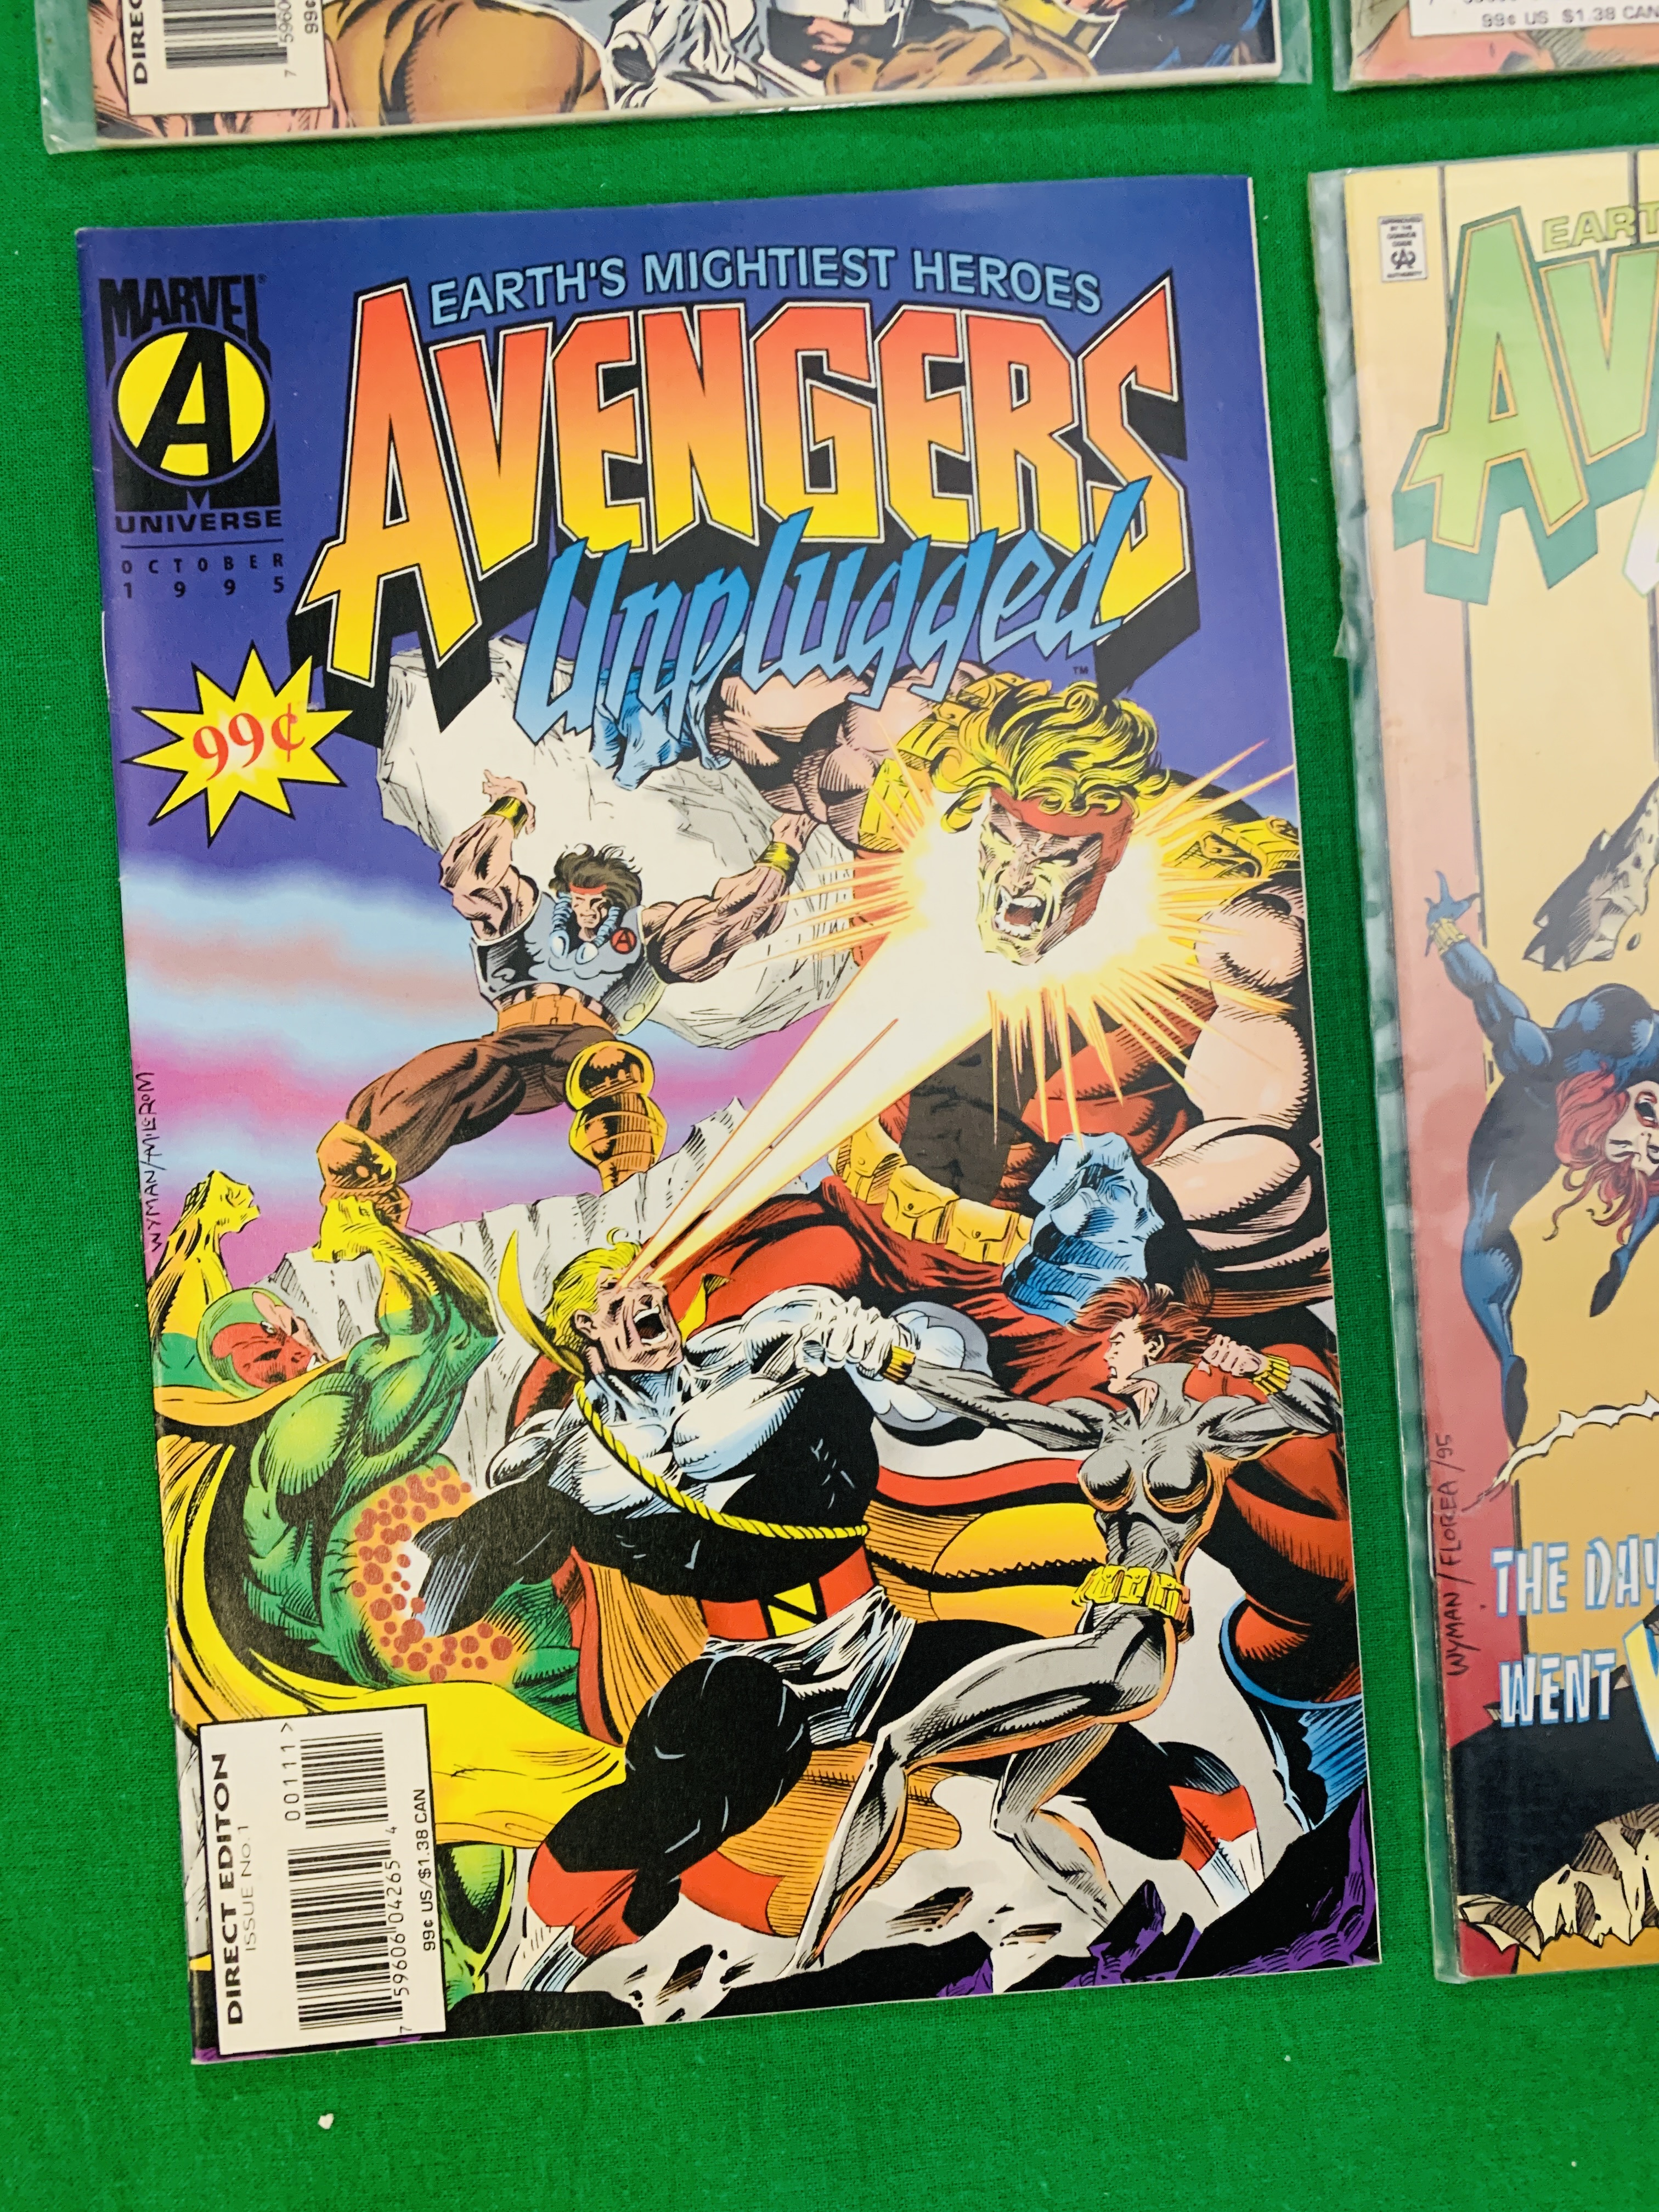 MARVEL COMICS THE AVENGERS UNPLUGGED NO. 1 - 6 FROM 1996, FIRST APPEARANCE NO. 5. MONICA RAMBEAU. - Image 2 of 7